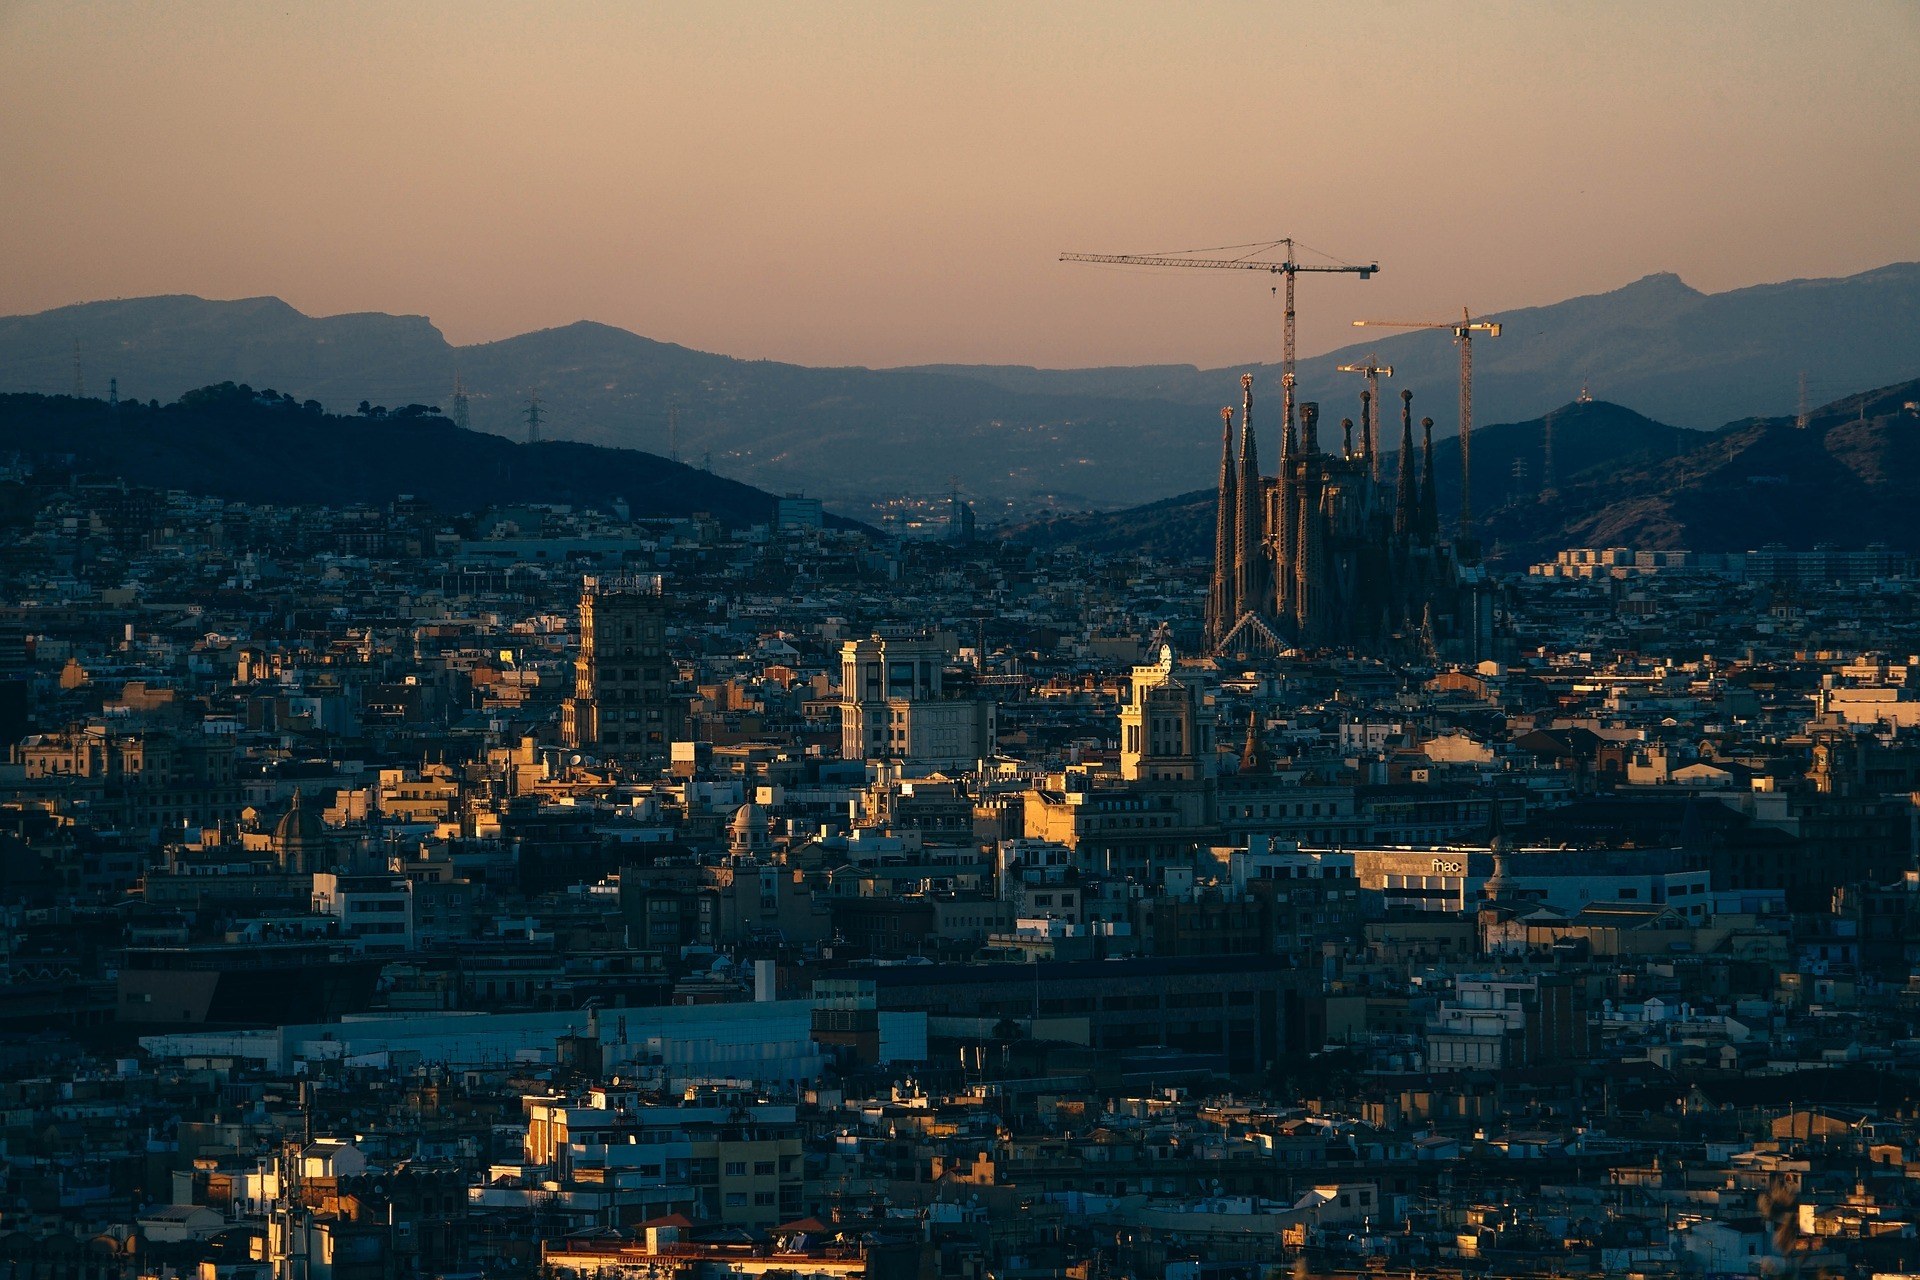 Visiting Barcelona: 5 Places Not to Miss - Barcelona landscape